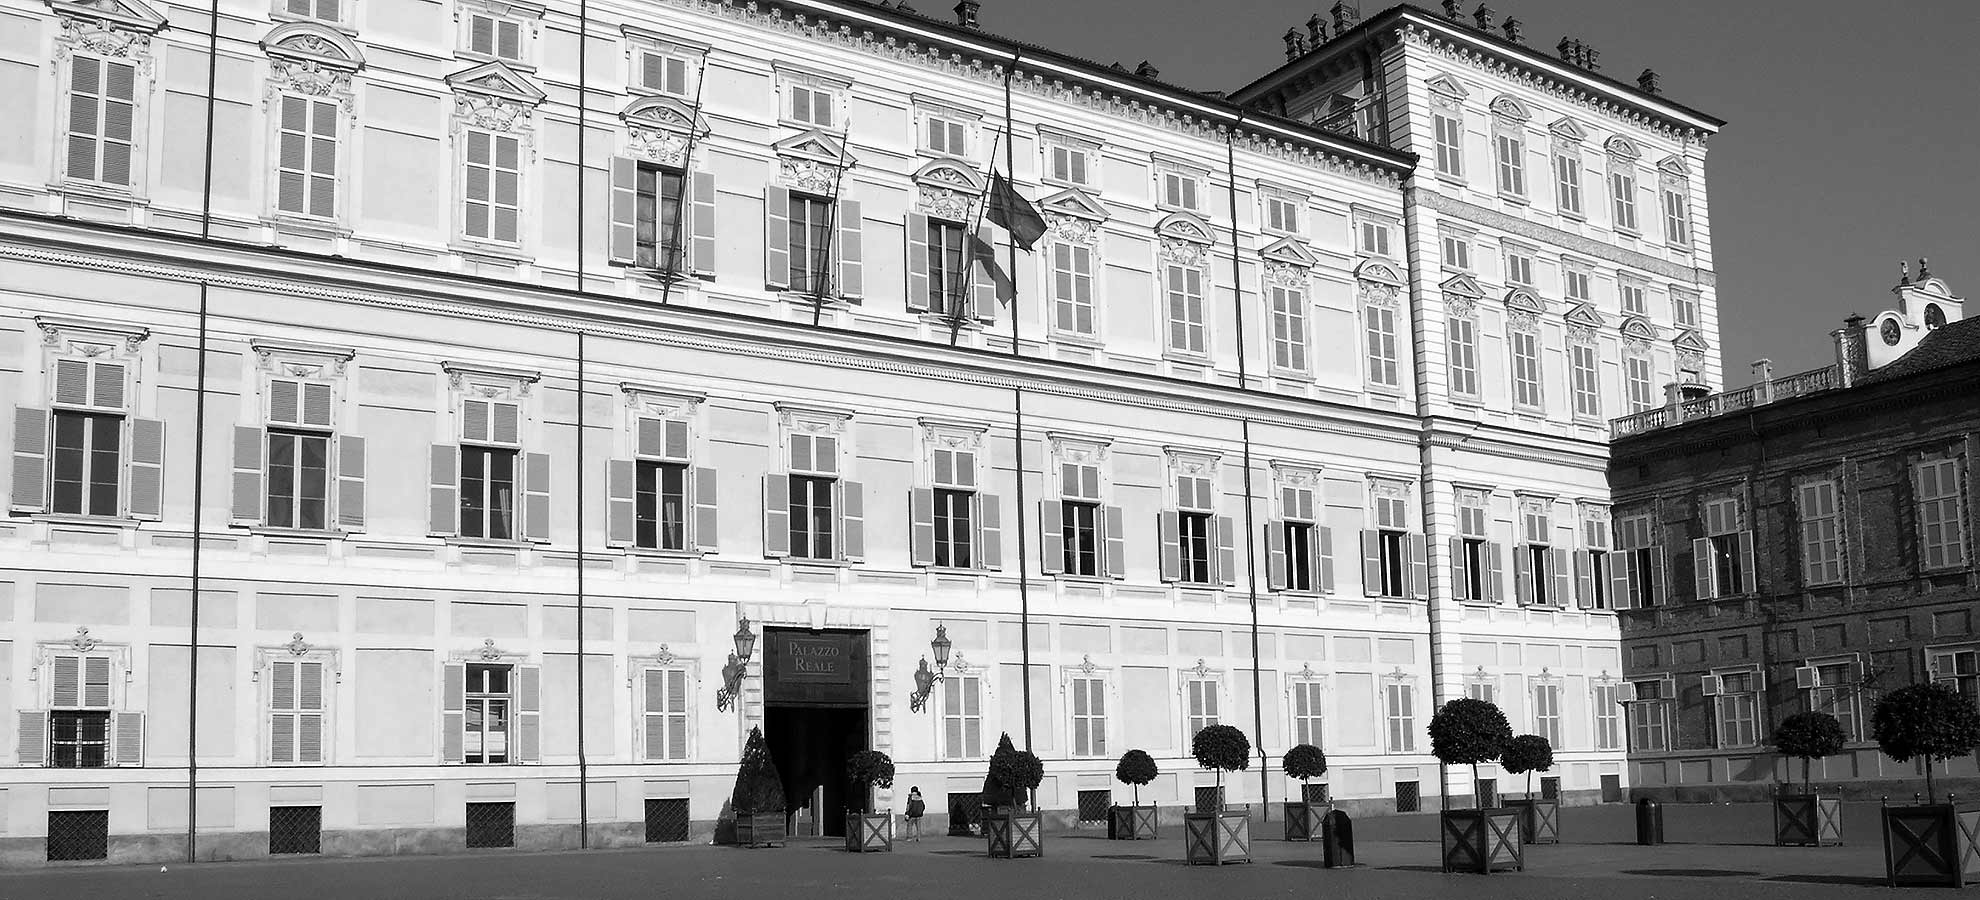 Classical architecture of Palazzo Reale in Turin, Italy